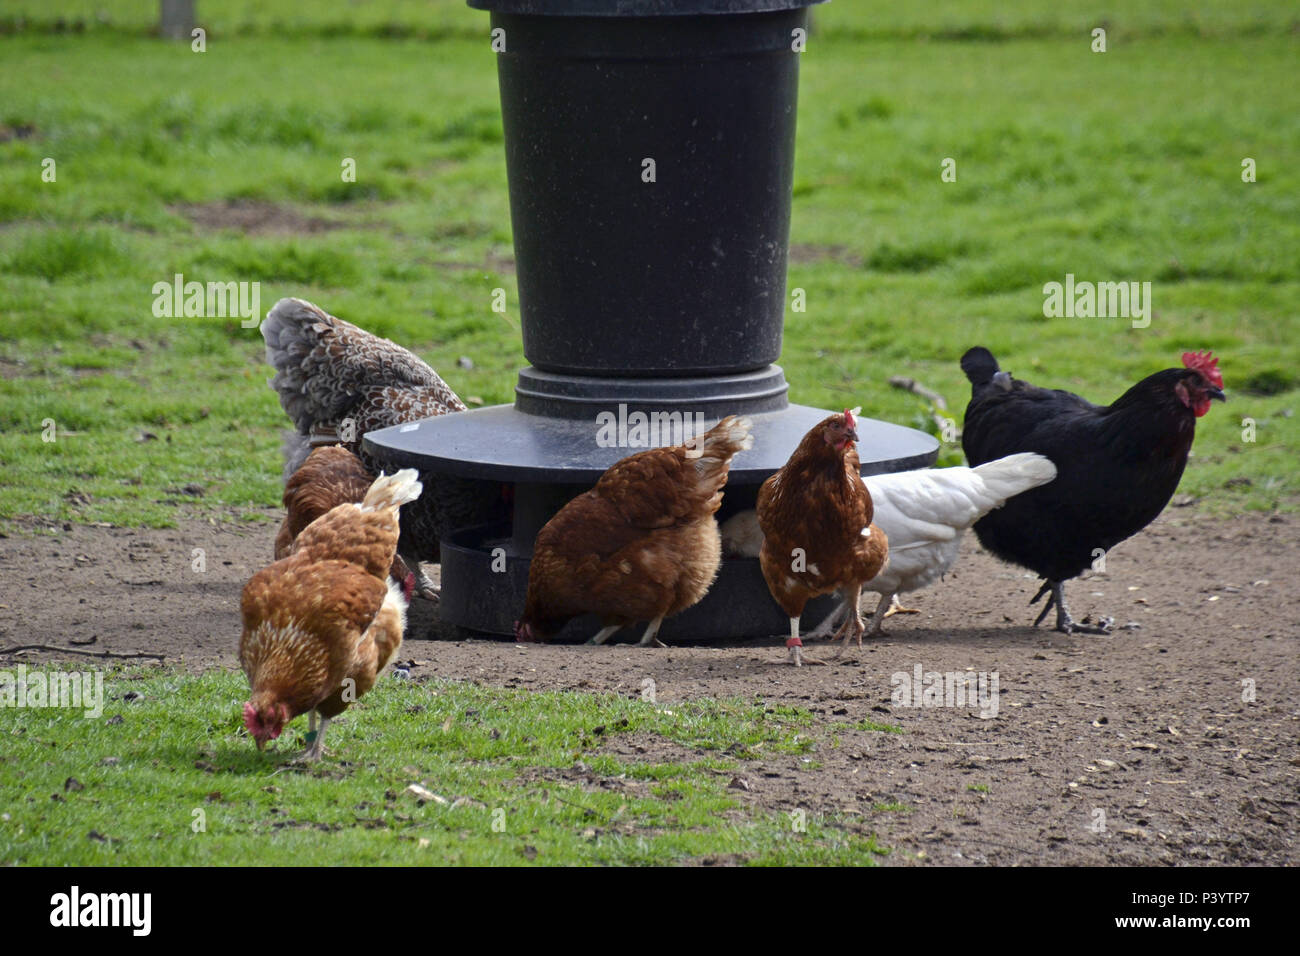 Hens at feeding bowl at Marlow Poultry, Buckinghamshire. Chickens Stock Photo